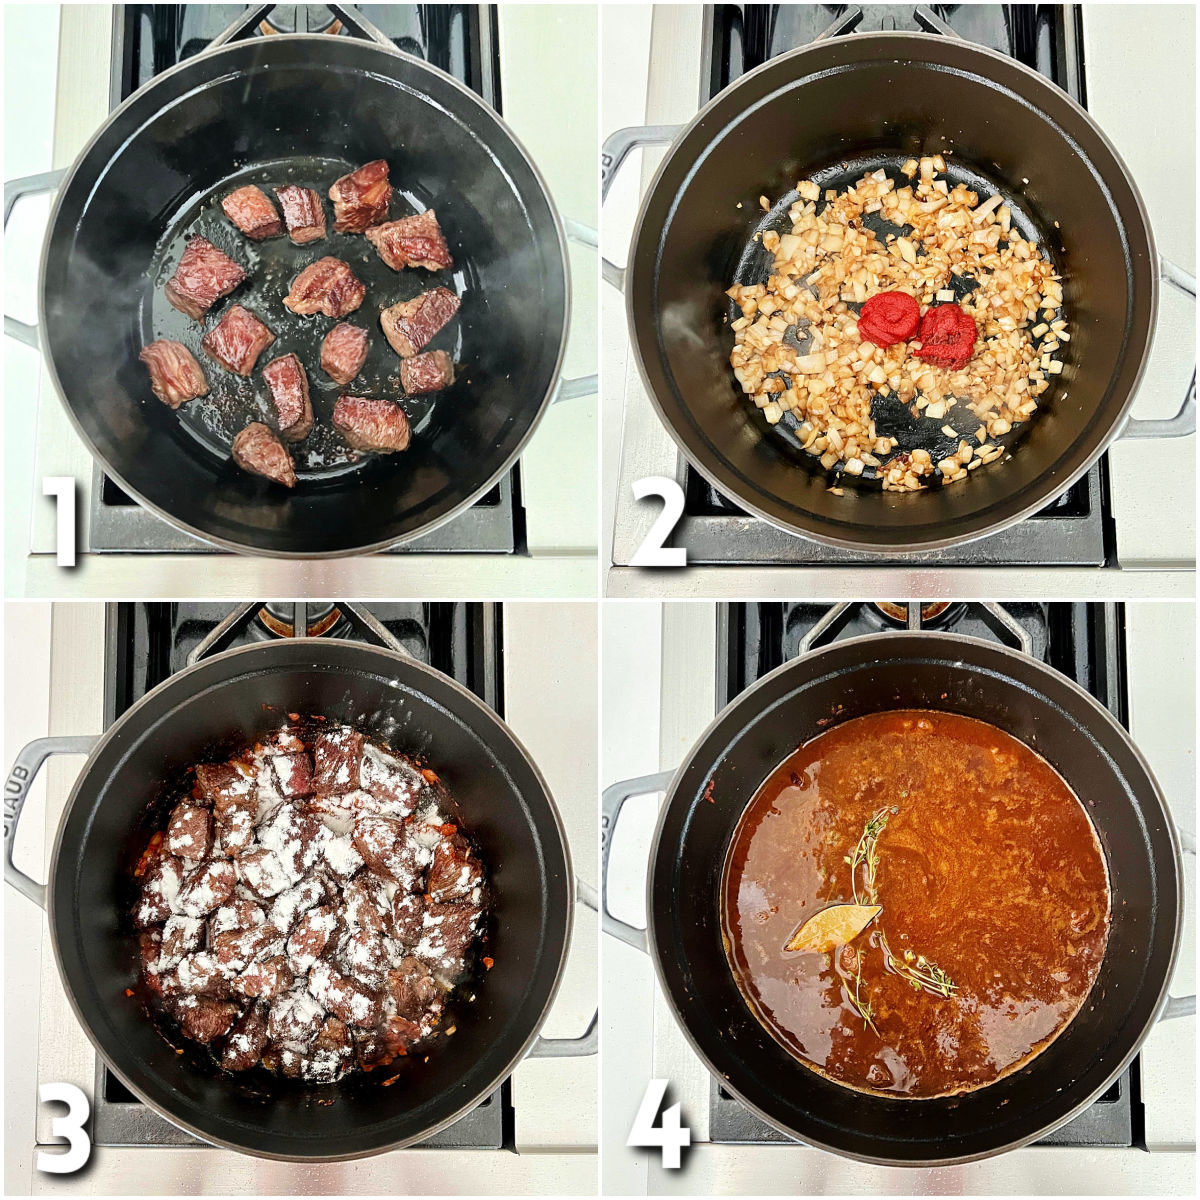 Steps 1-4 for making Classic Dutch Oven Beef Stew.